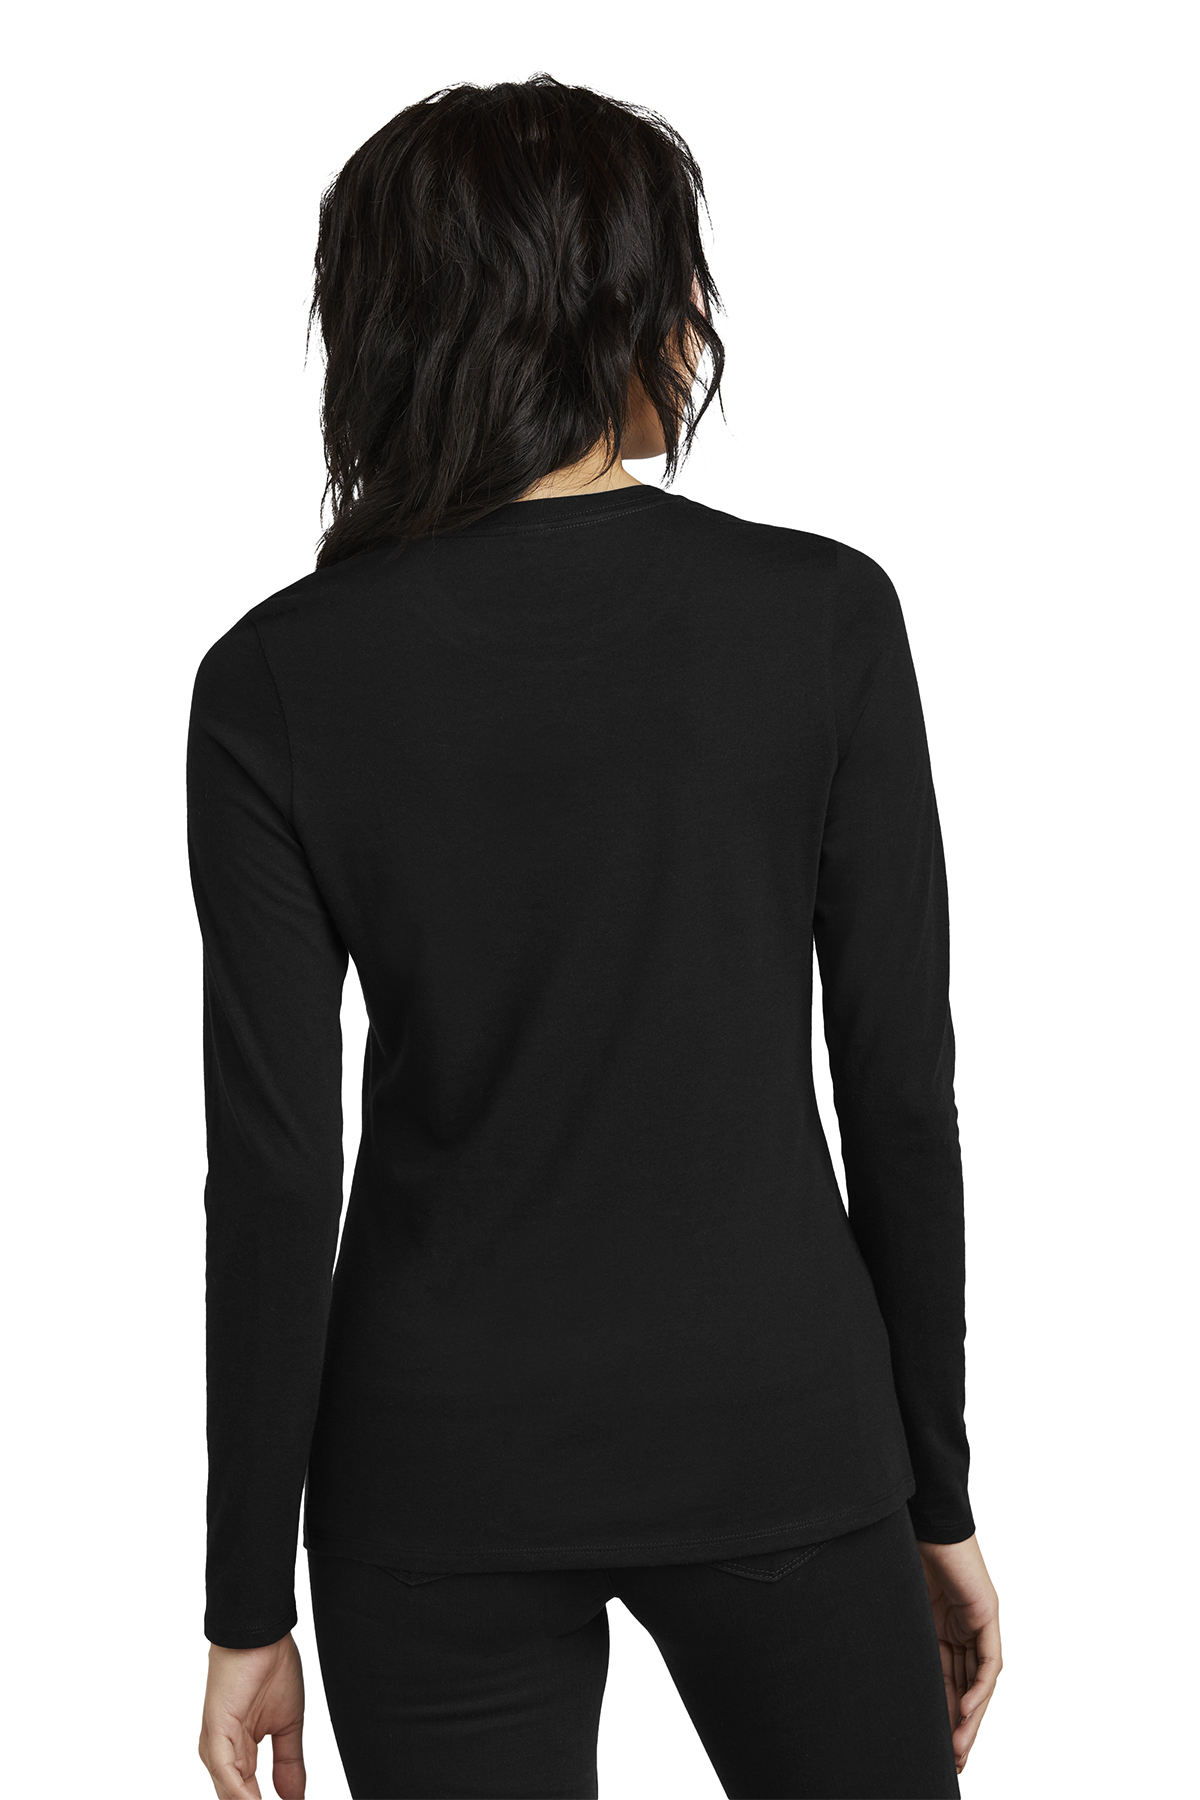 District Women\'s Perfect Blend CVC Long Sleeve Tee | Product | District